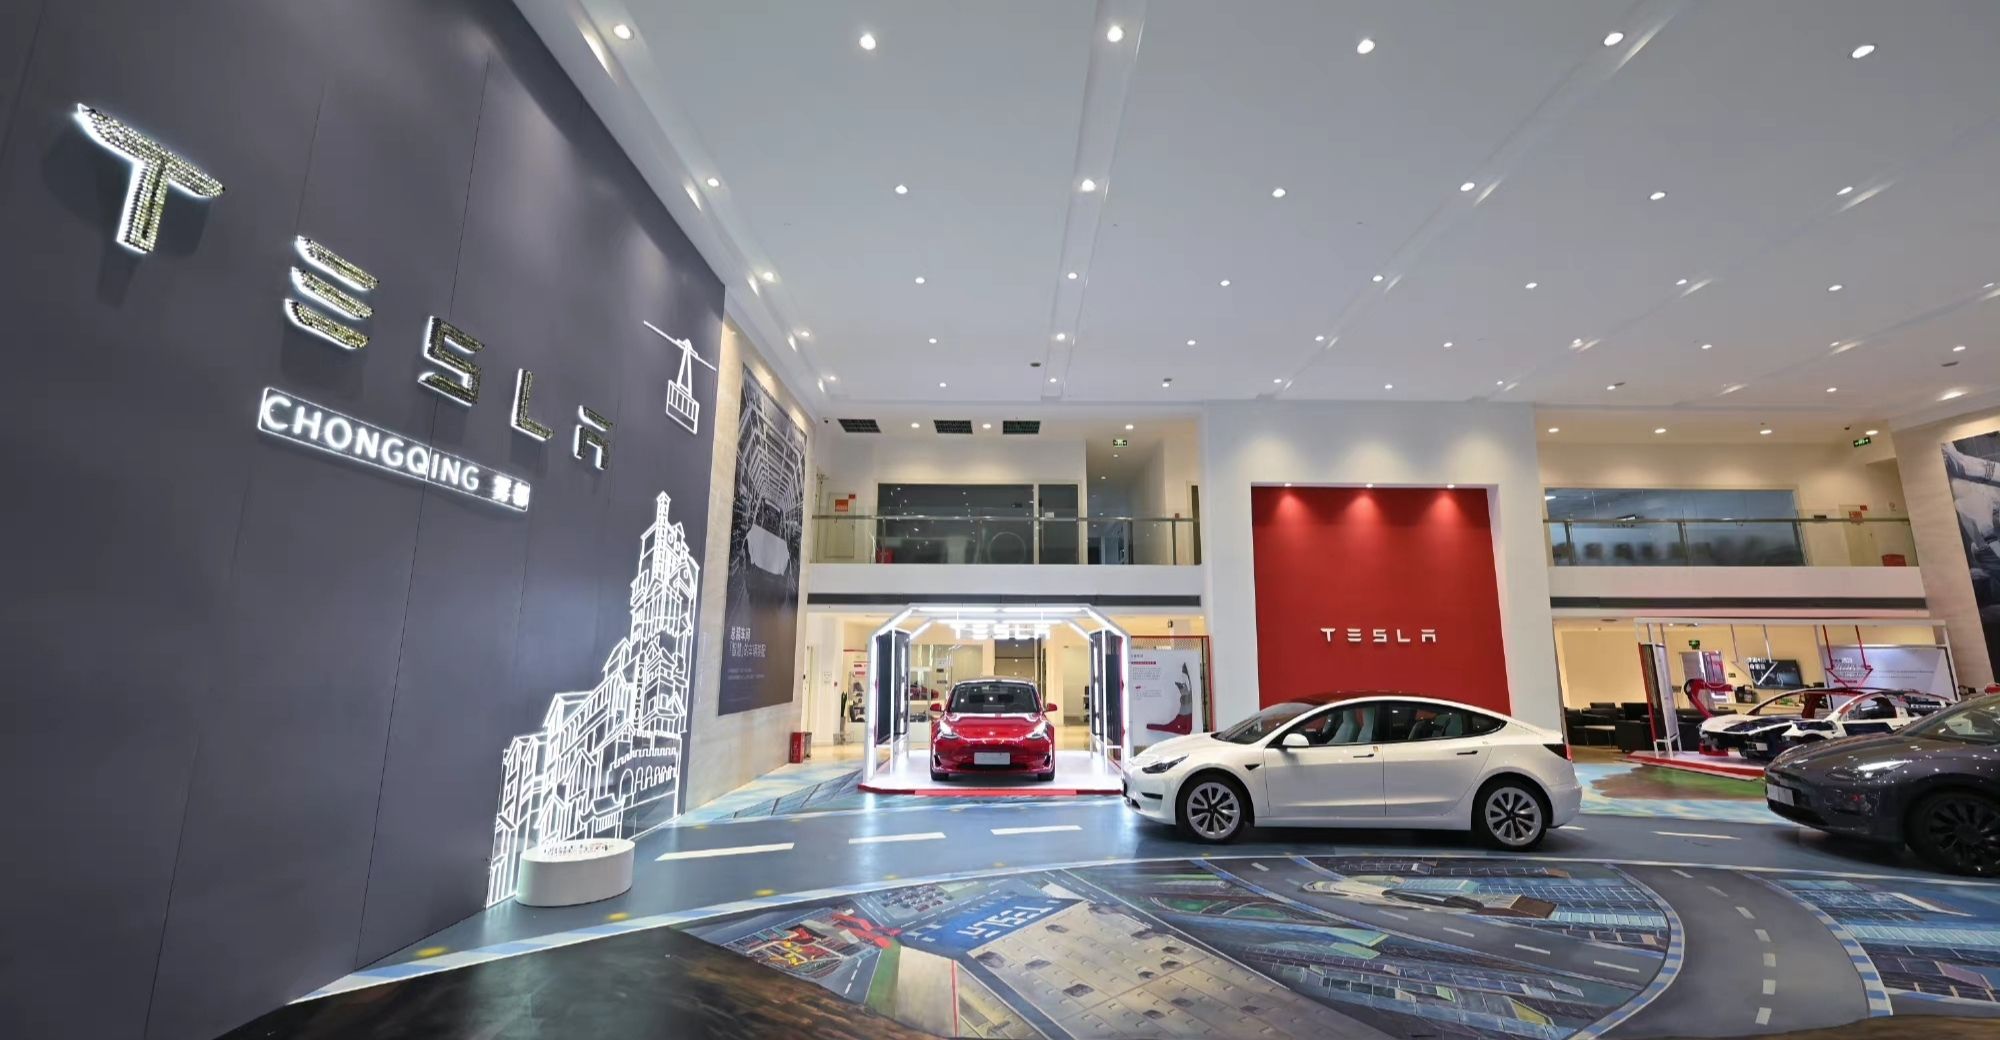 Tesla’s Q1 Revenue in China Reaches $4.89B, YoY Increase of over 5%